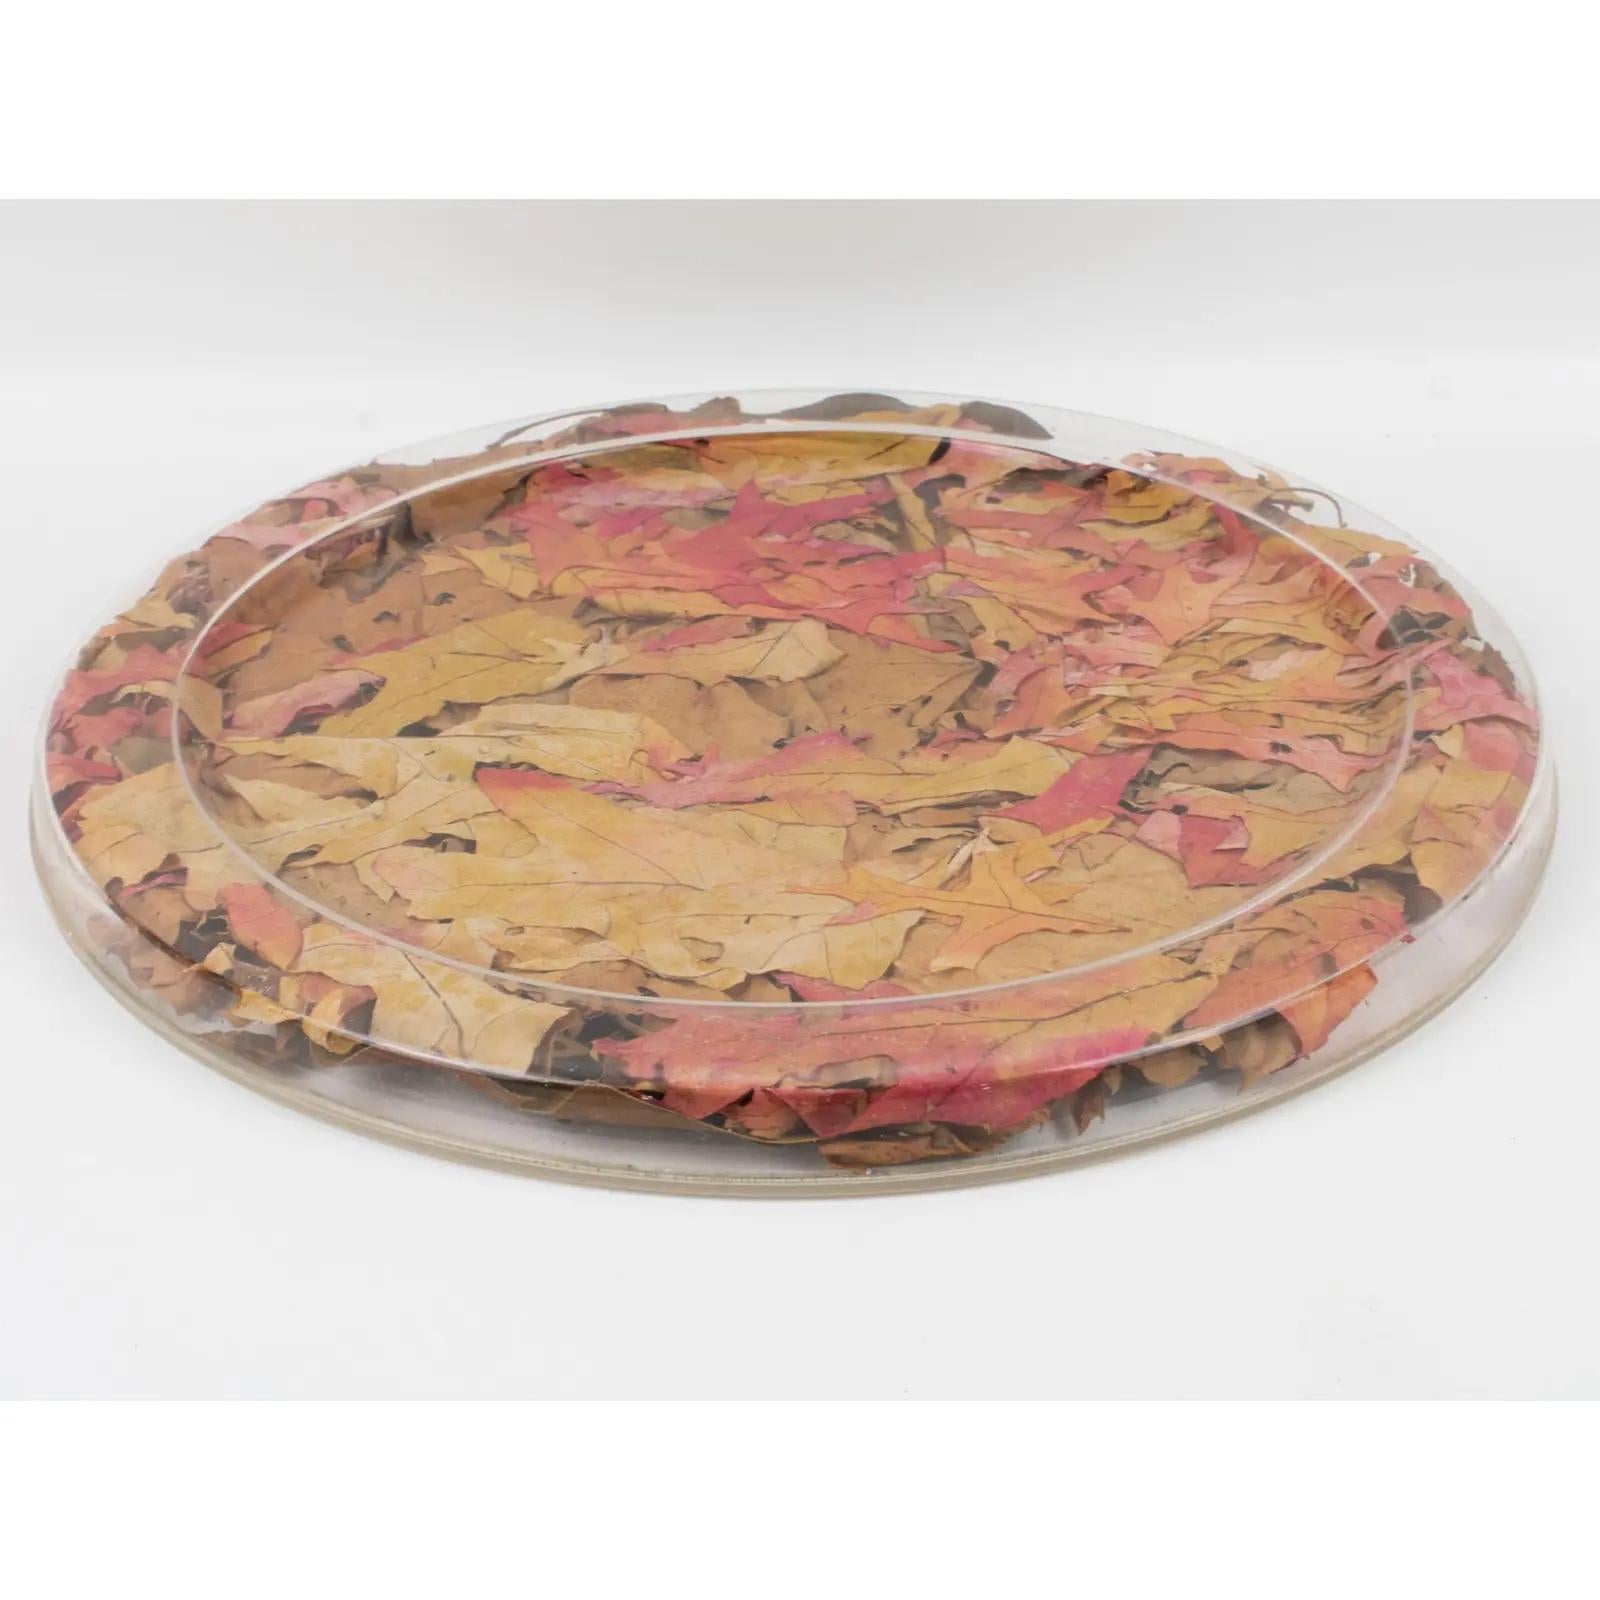 This beautiful serving tray was designed for the Christian Dior Home Collection in the 1970s. This board or platter has a rounded shape and raised edges. With a natural organic touch, it is made of Lucite or plexiglass with dried autumn maple leaves